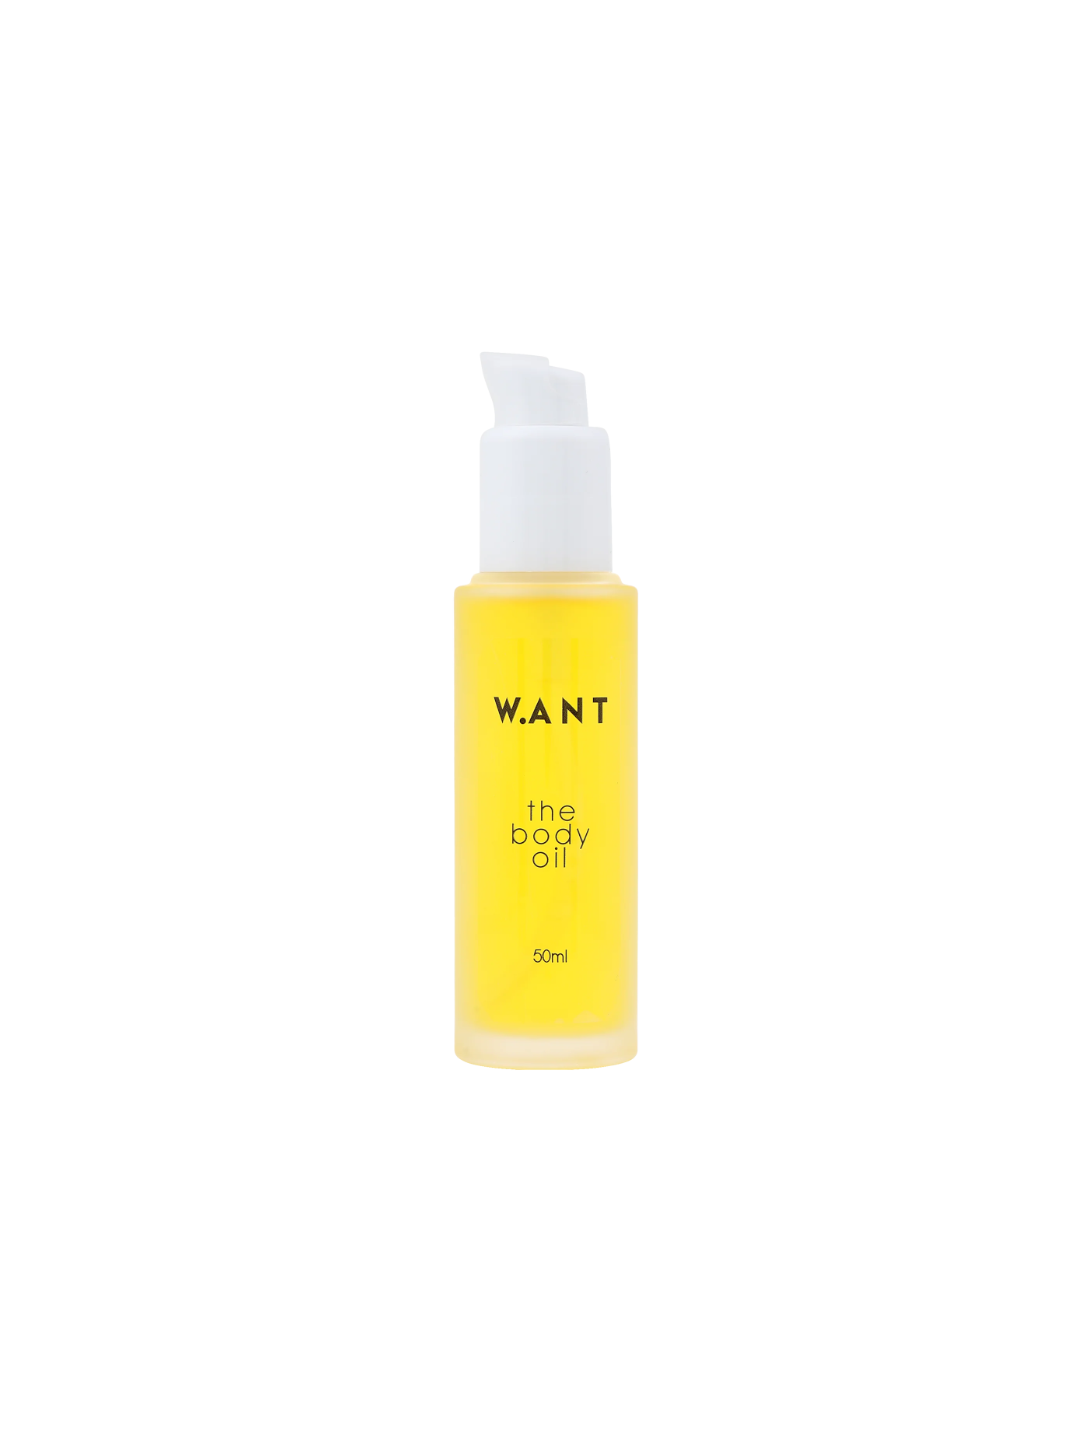 body oil natural ingredients cruelty-free skincare